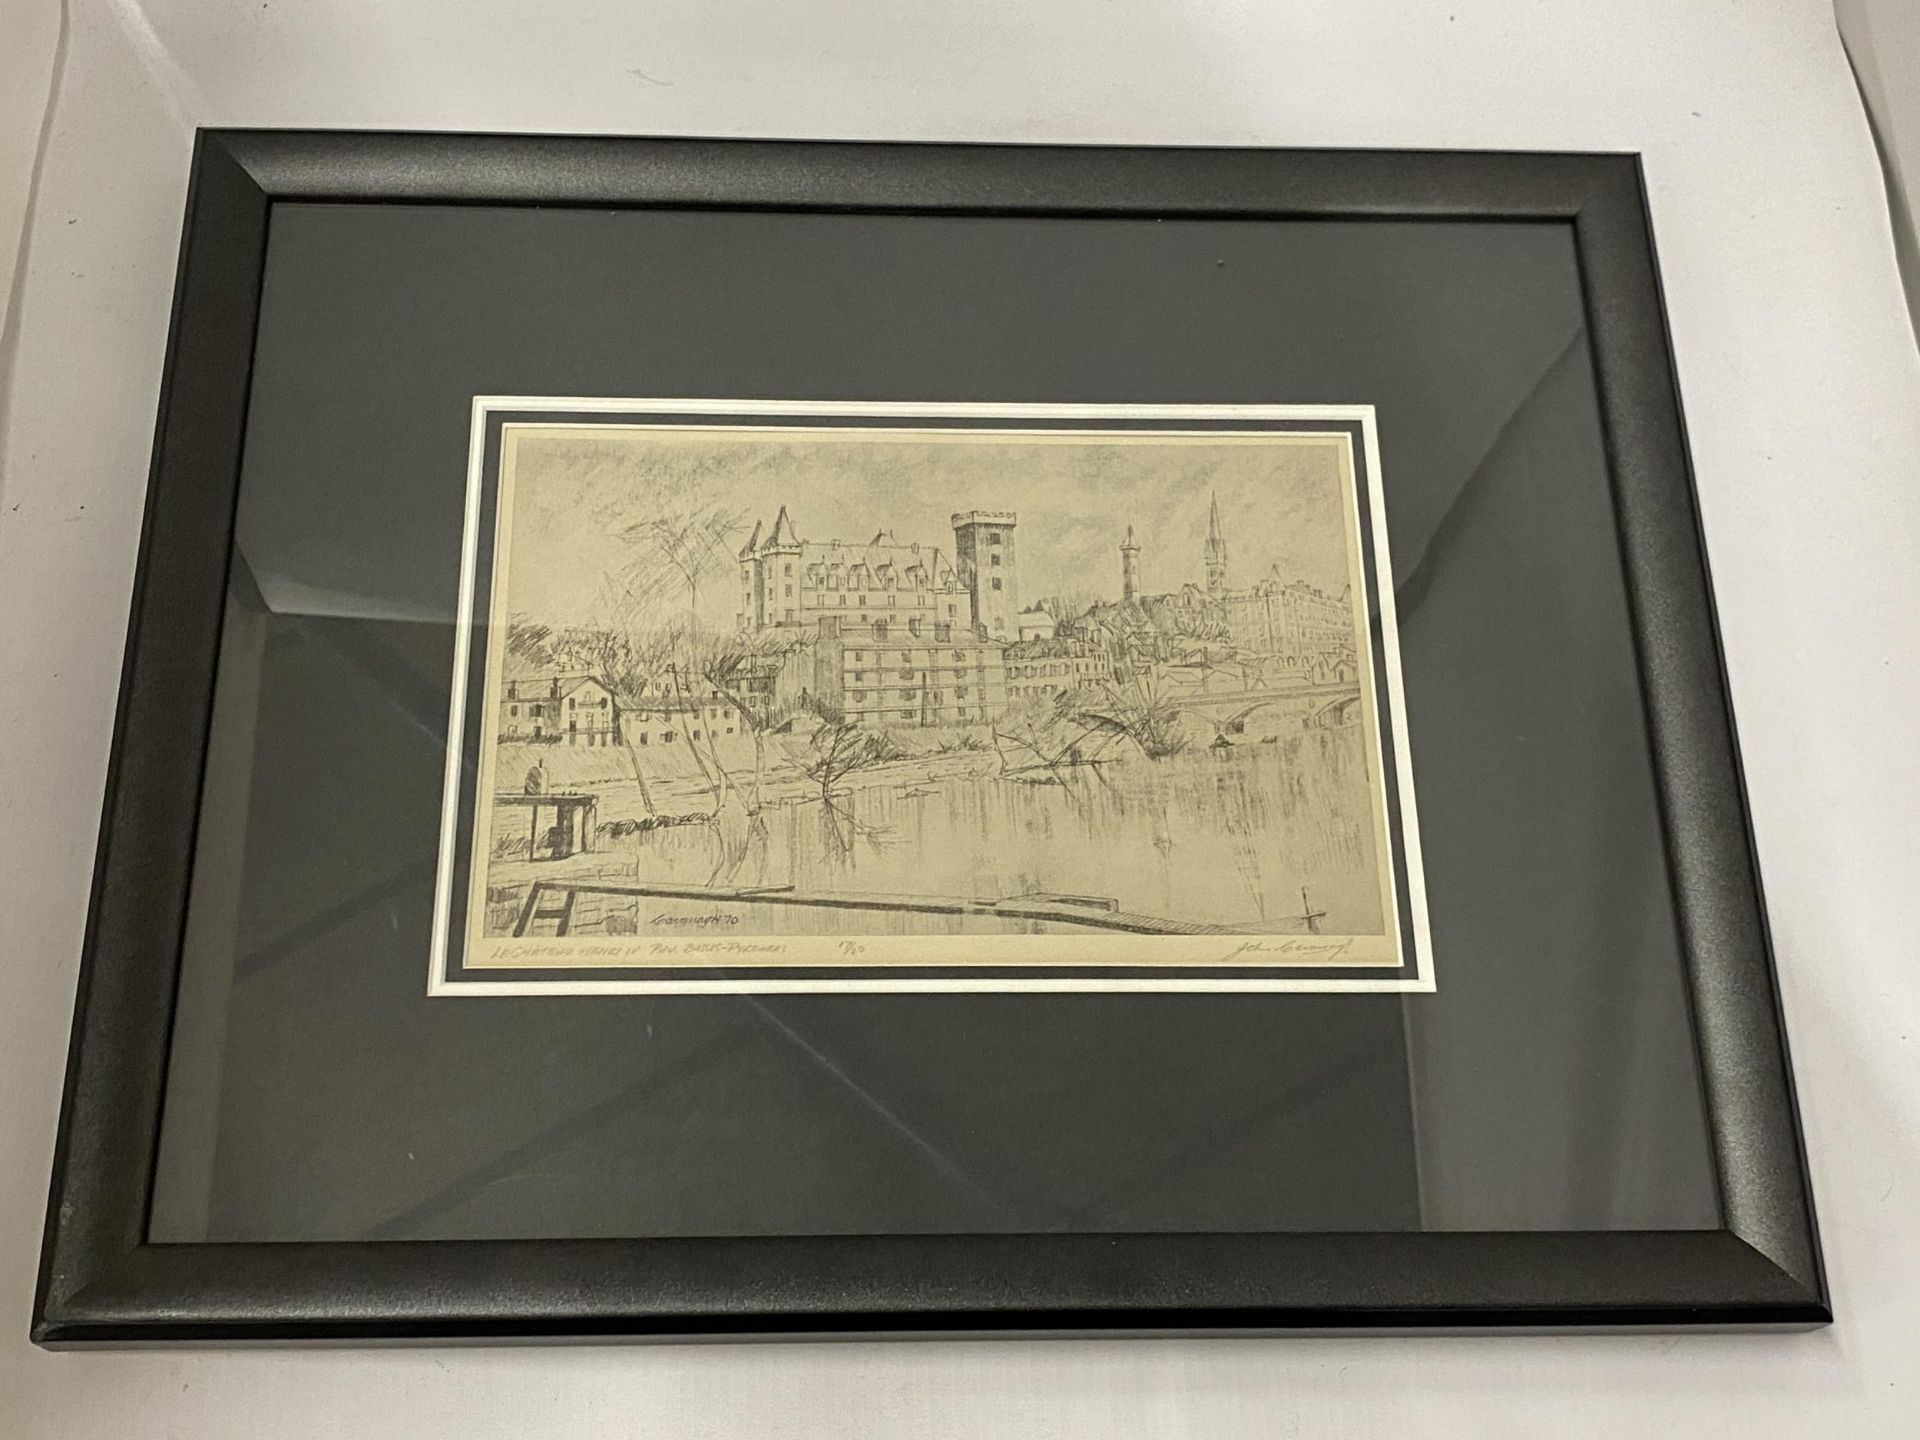 A FRAMED LIMITED EDITION LE CHATEAU HENRY IV BY PENCIL SIGNED BY CAVANAGH '70